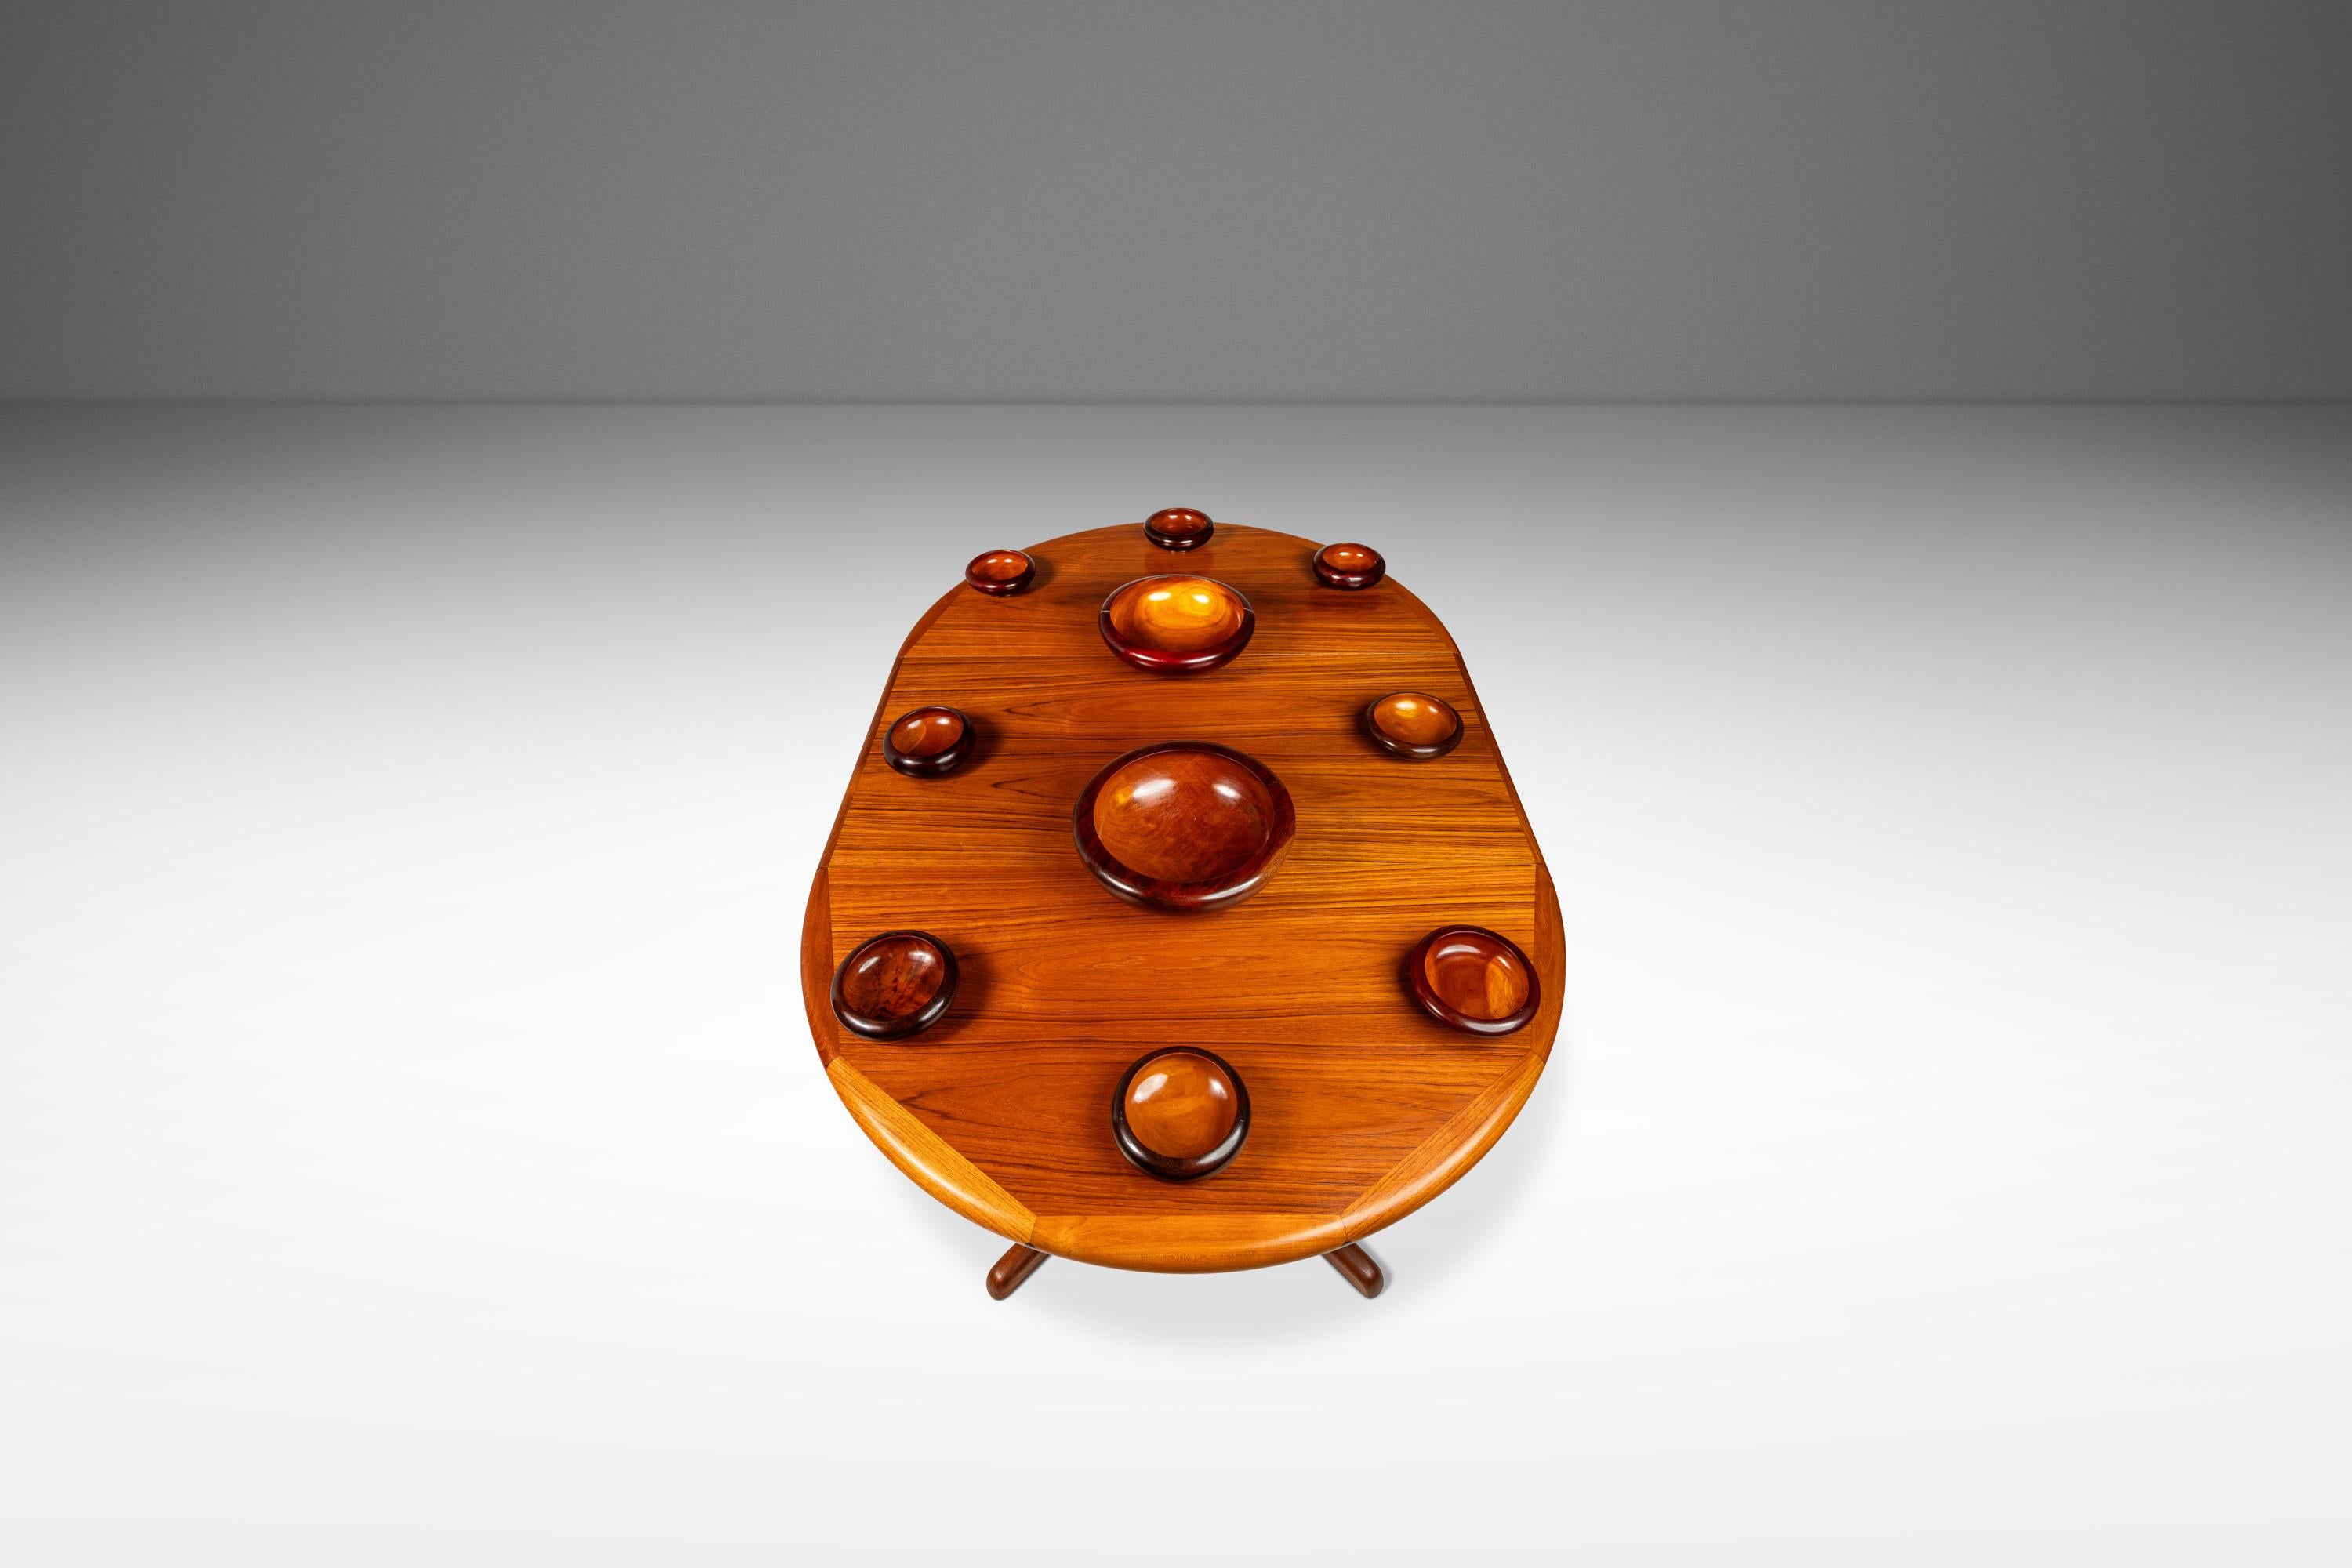 Set of 10 Organic Modern Hand-Turned Cherry Wood Serving Bowls, USA, c. 1960s For Sale 7